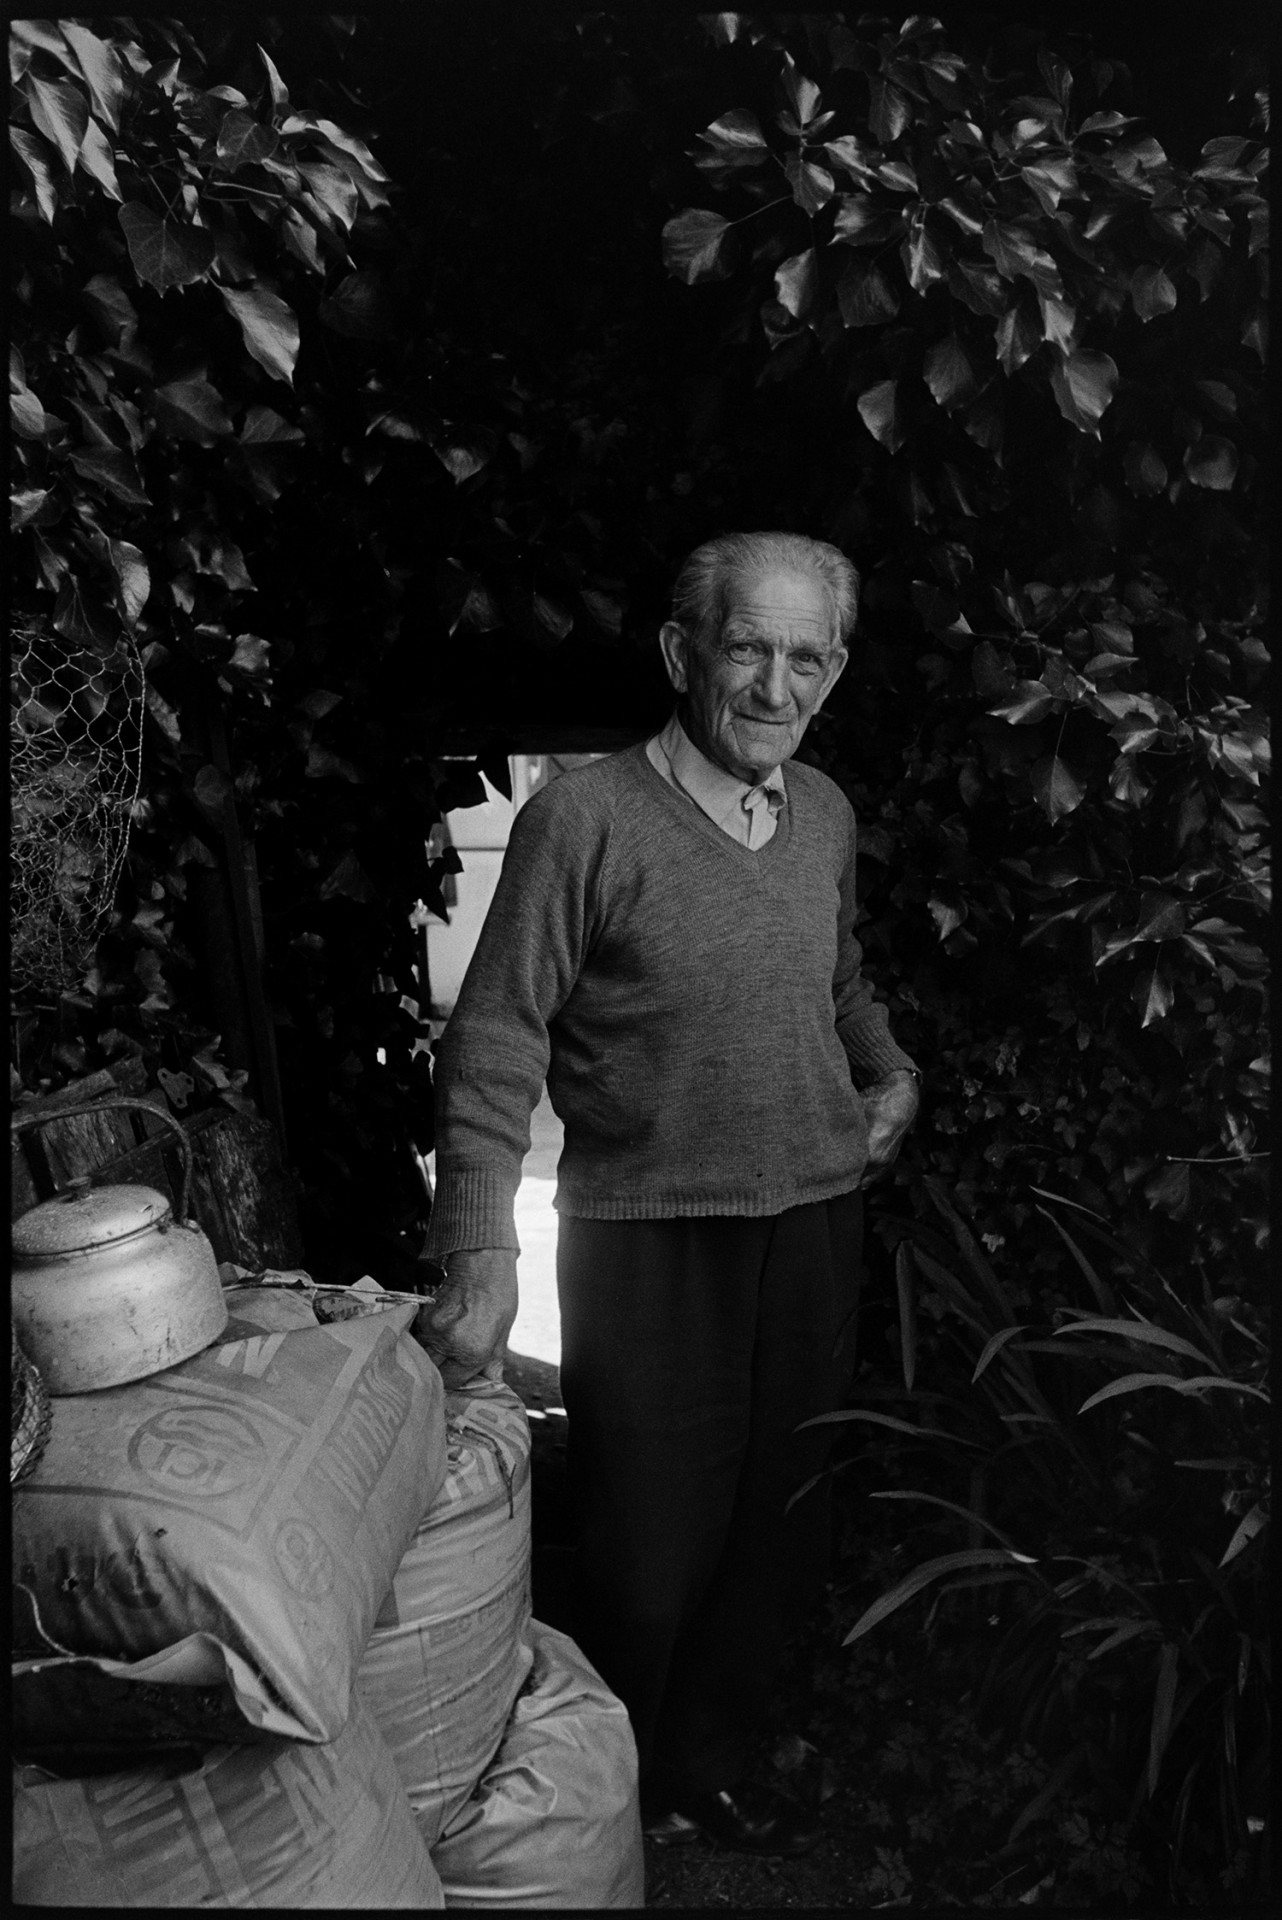 Man chatting in garden, standing in doorway. 
[Bill Hutchins standing by a pile of sacks and an archway or gateway surrounded by foliage, in his garden at Dolton.]